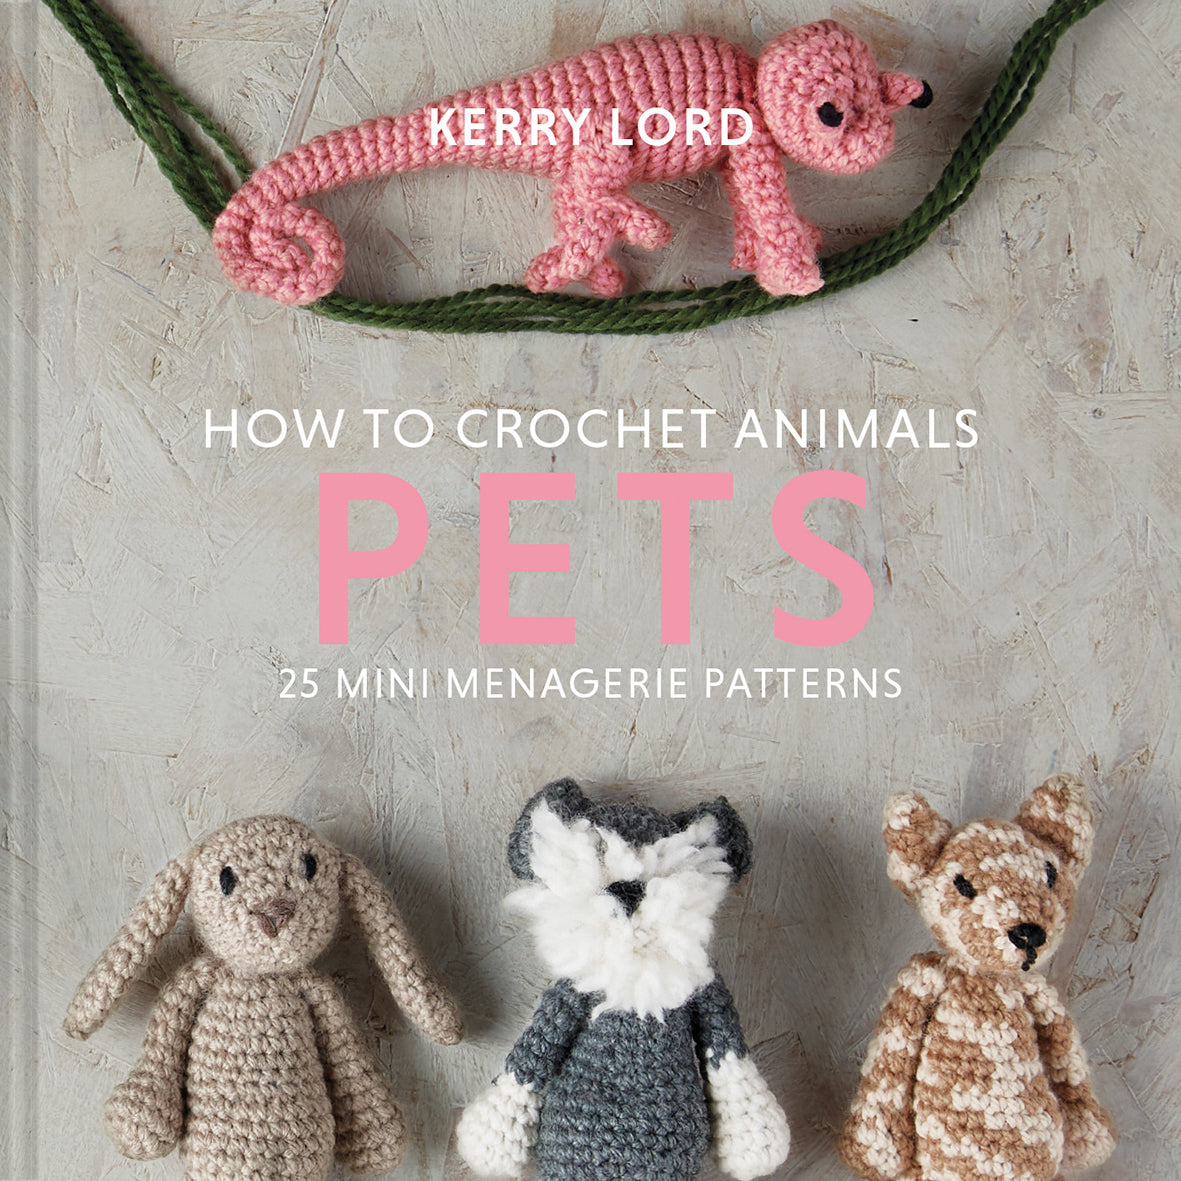 How to Crochet Animals: Pets | Kerry Lord